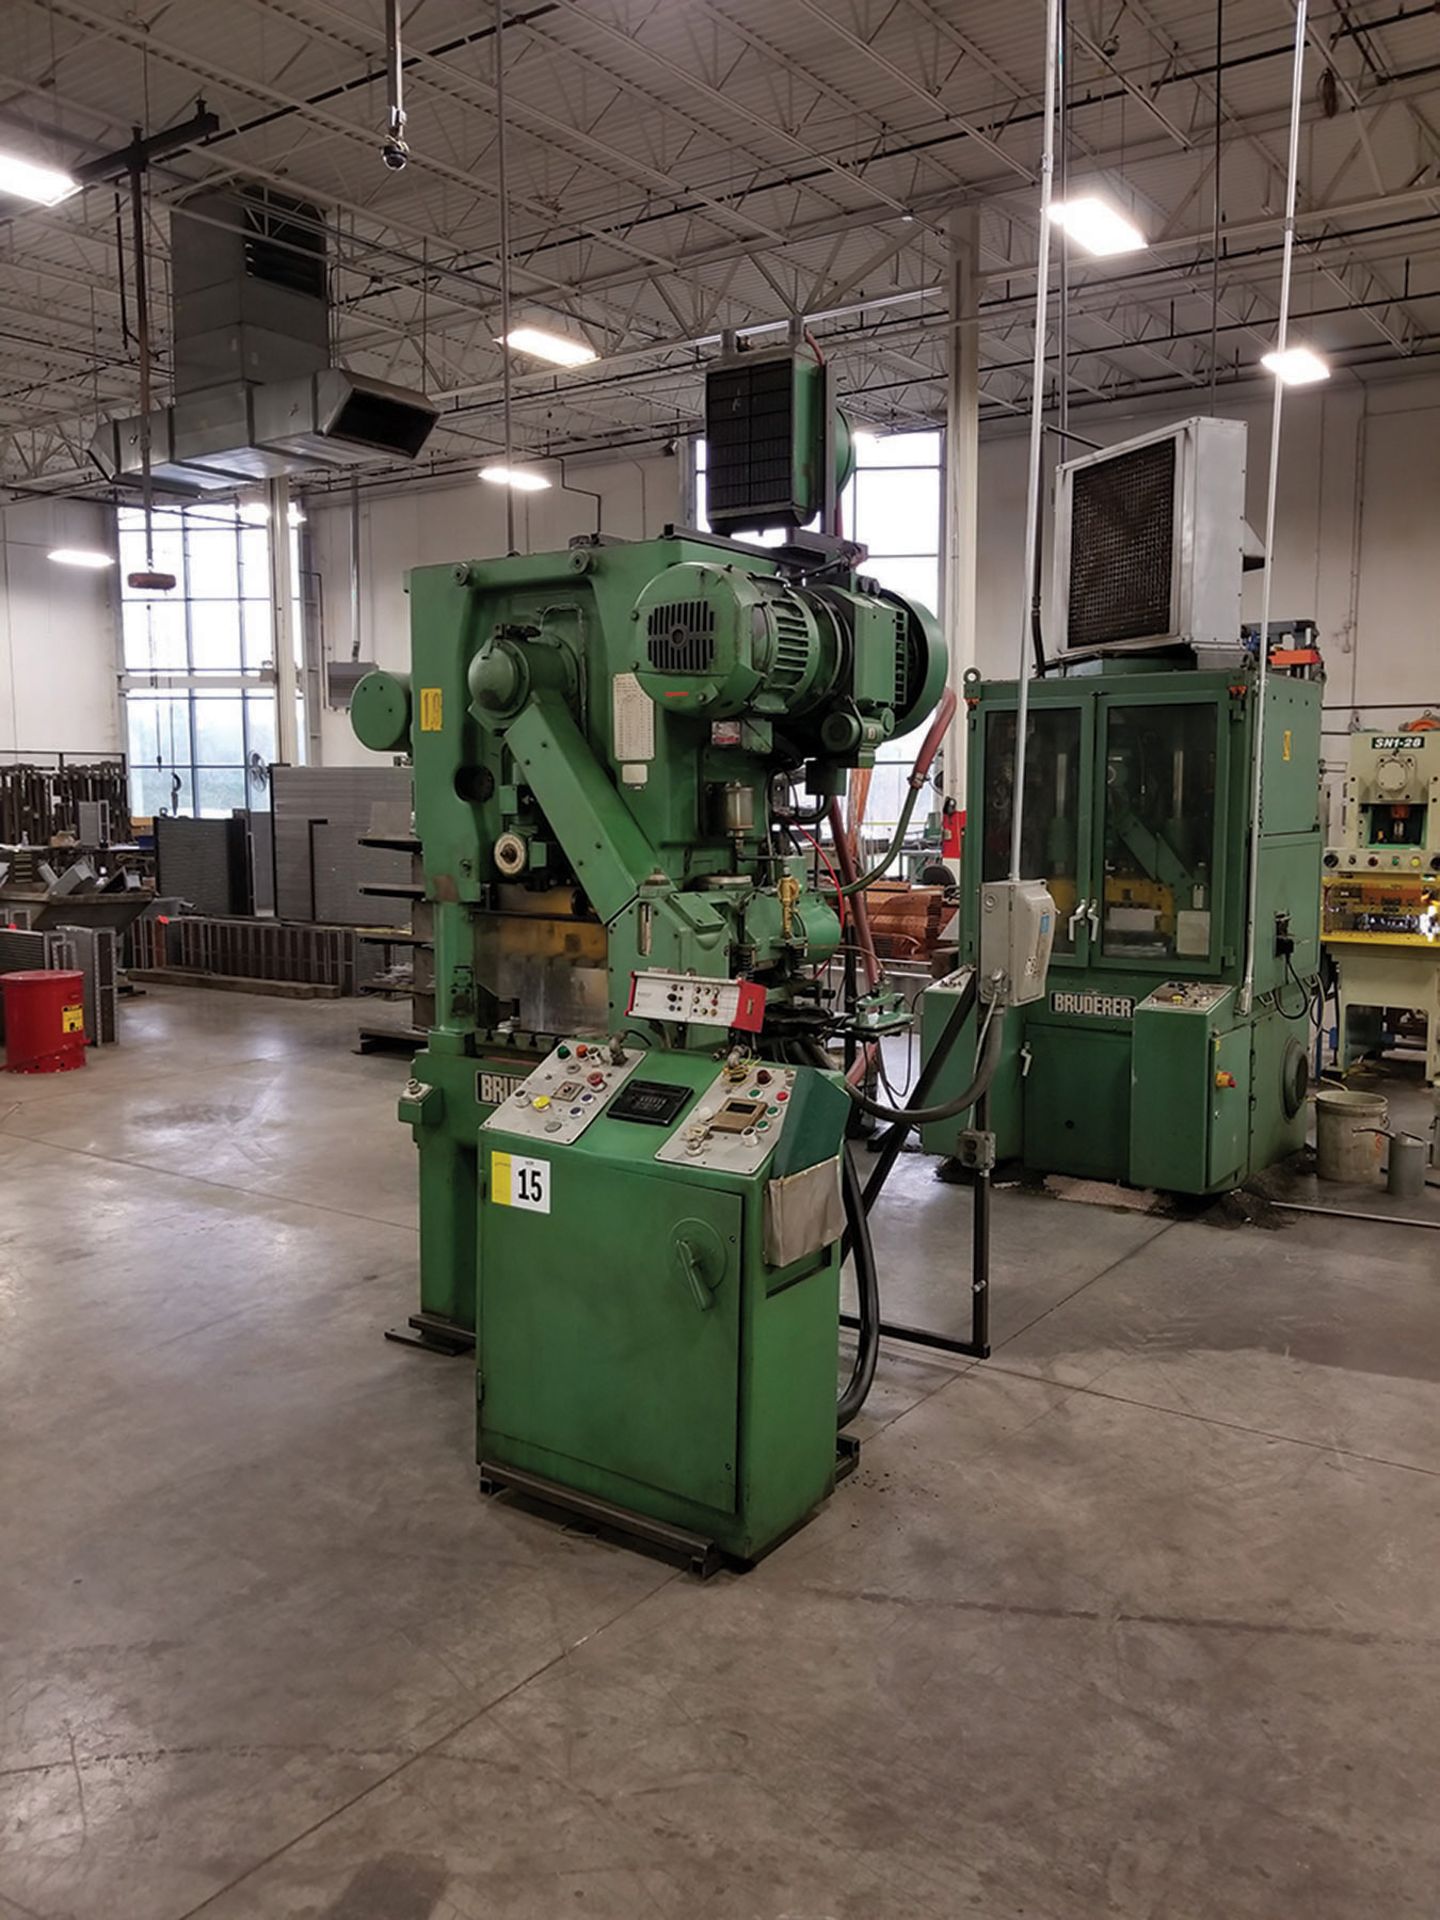 BRUDERER BSTA 25 PUNCH PRESS, MALFUNCTION DETECTOR, 25-HP GE MOTOR, 21 X 21 T-SLOTTED TABLE, 21'`W X - Image 4 of 7